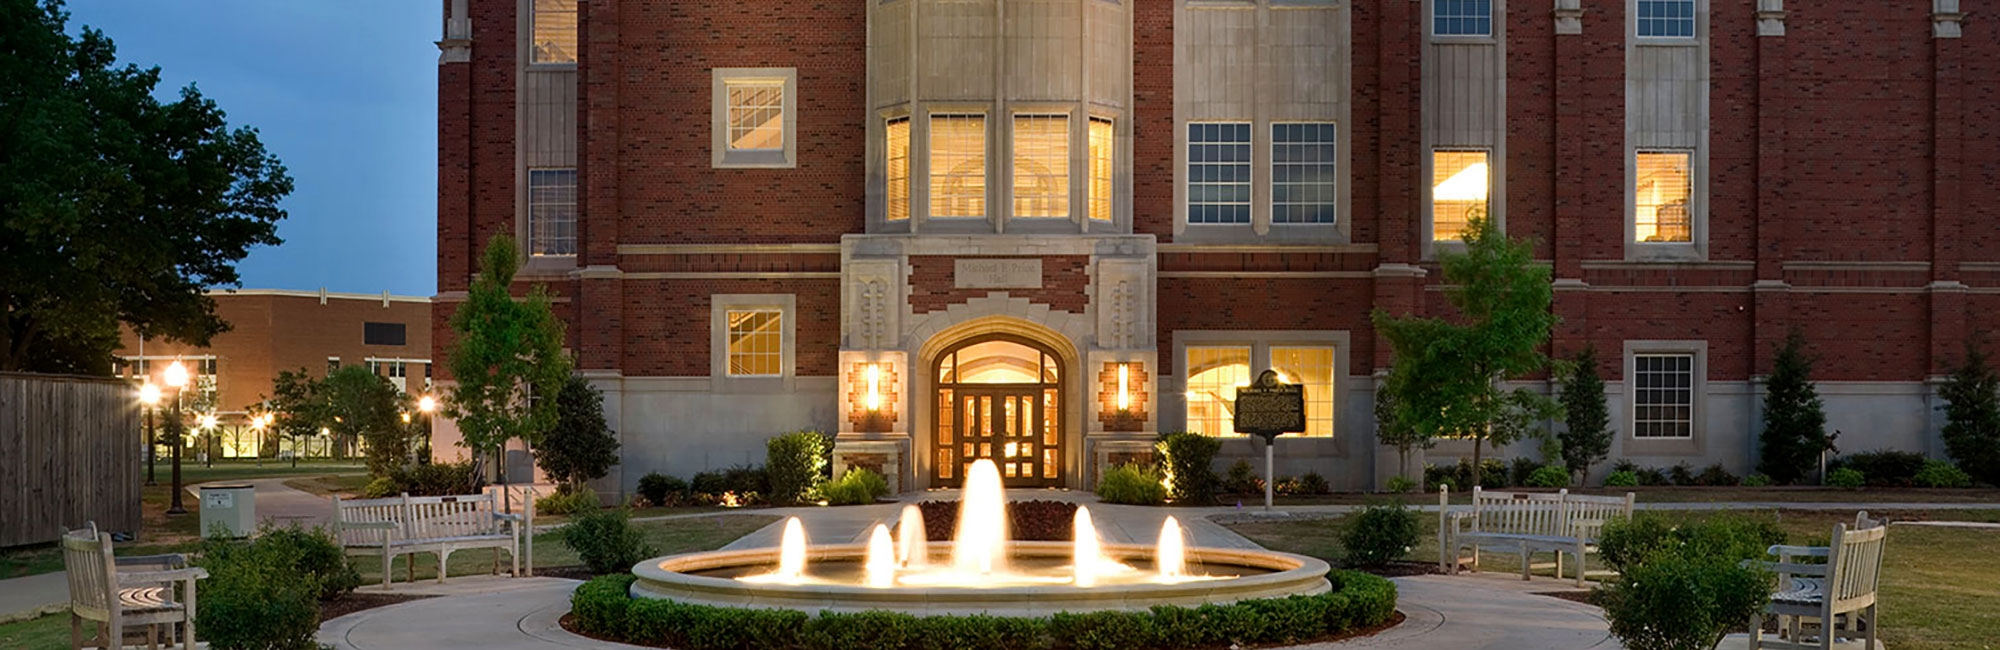 Exterior of Price Hall in the evening with subtle lighting and a fountain